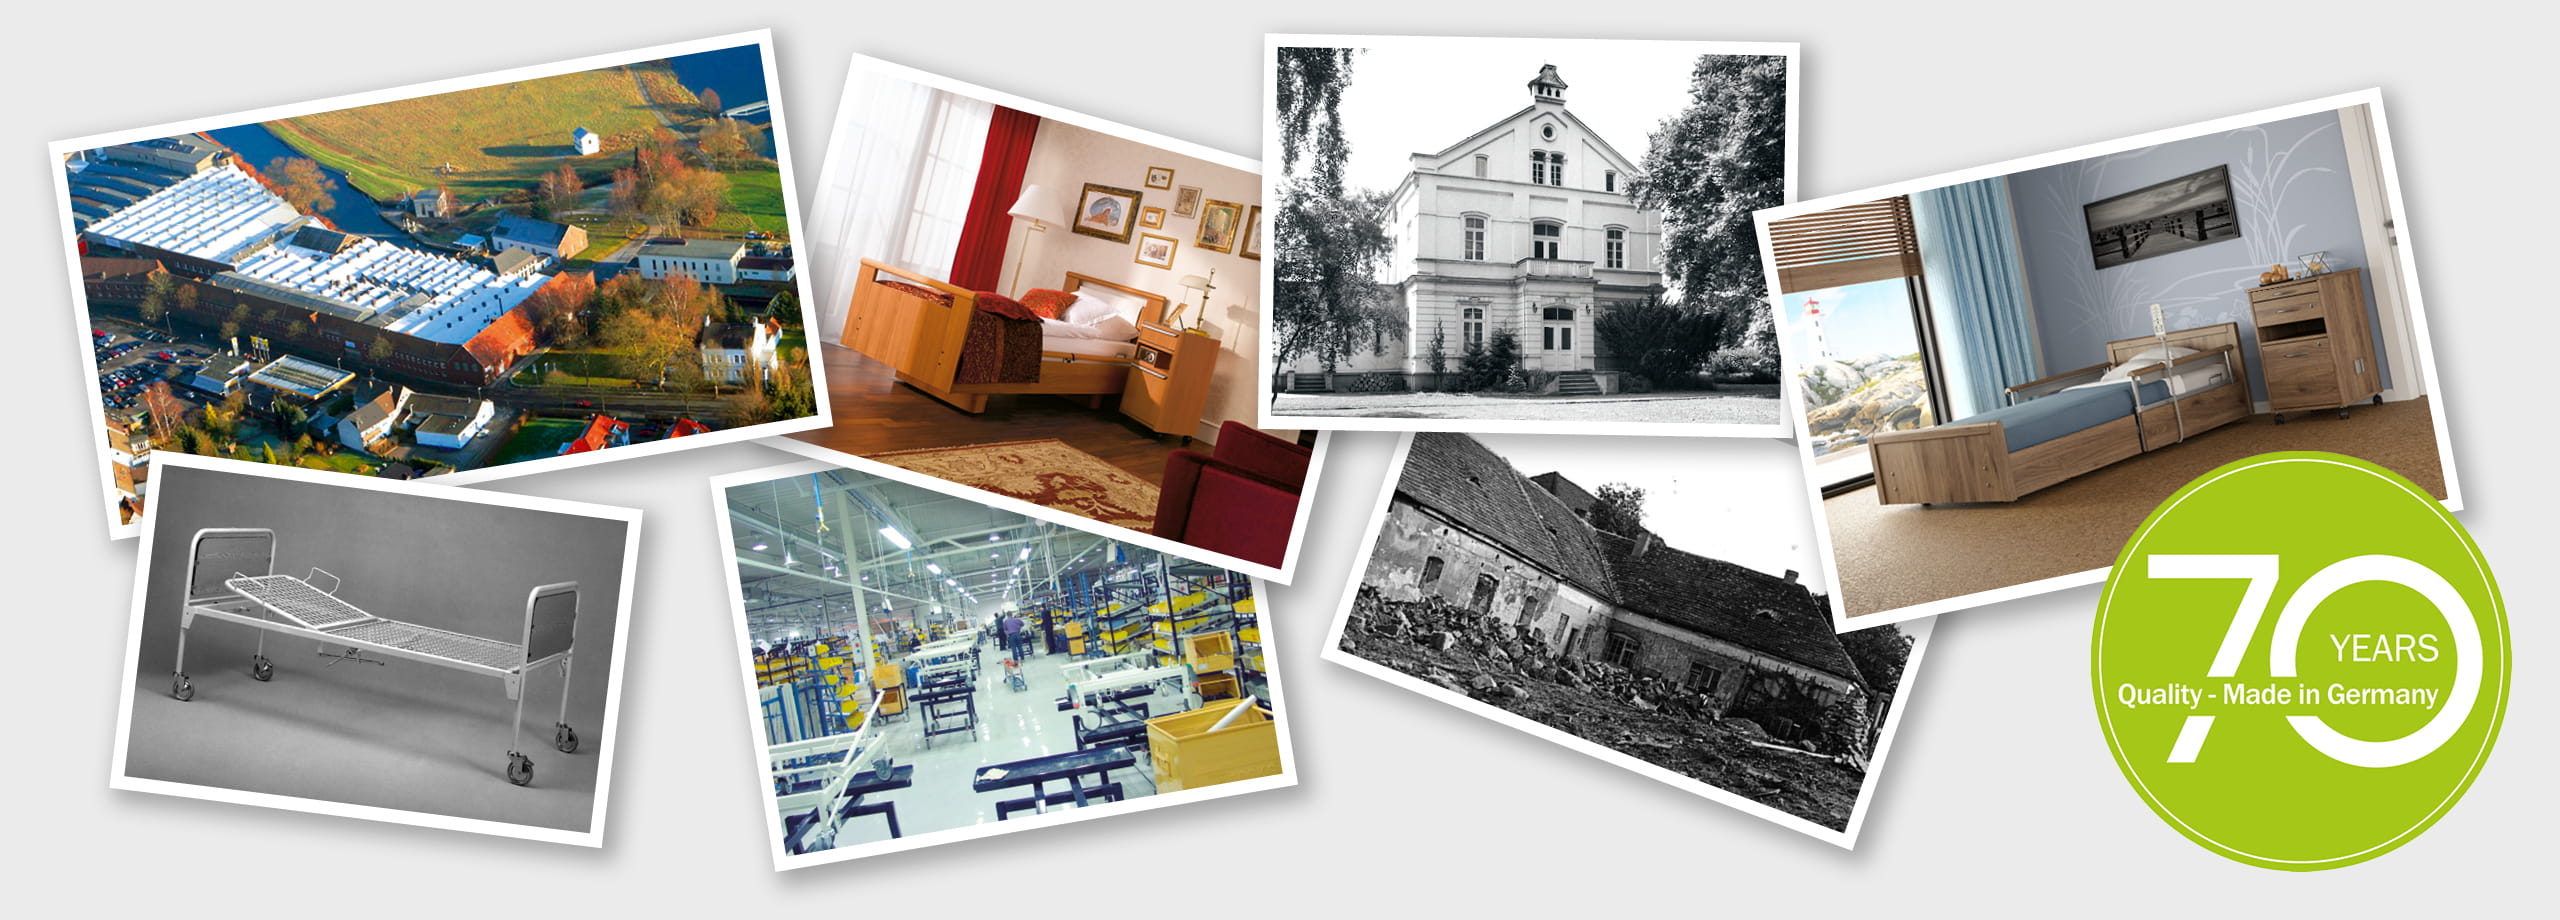 70 years: Quality - Made in Germany wissner-bosserhoff celebrates its birthday